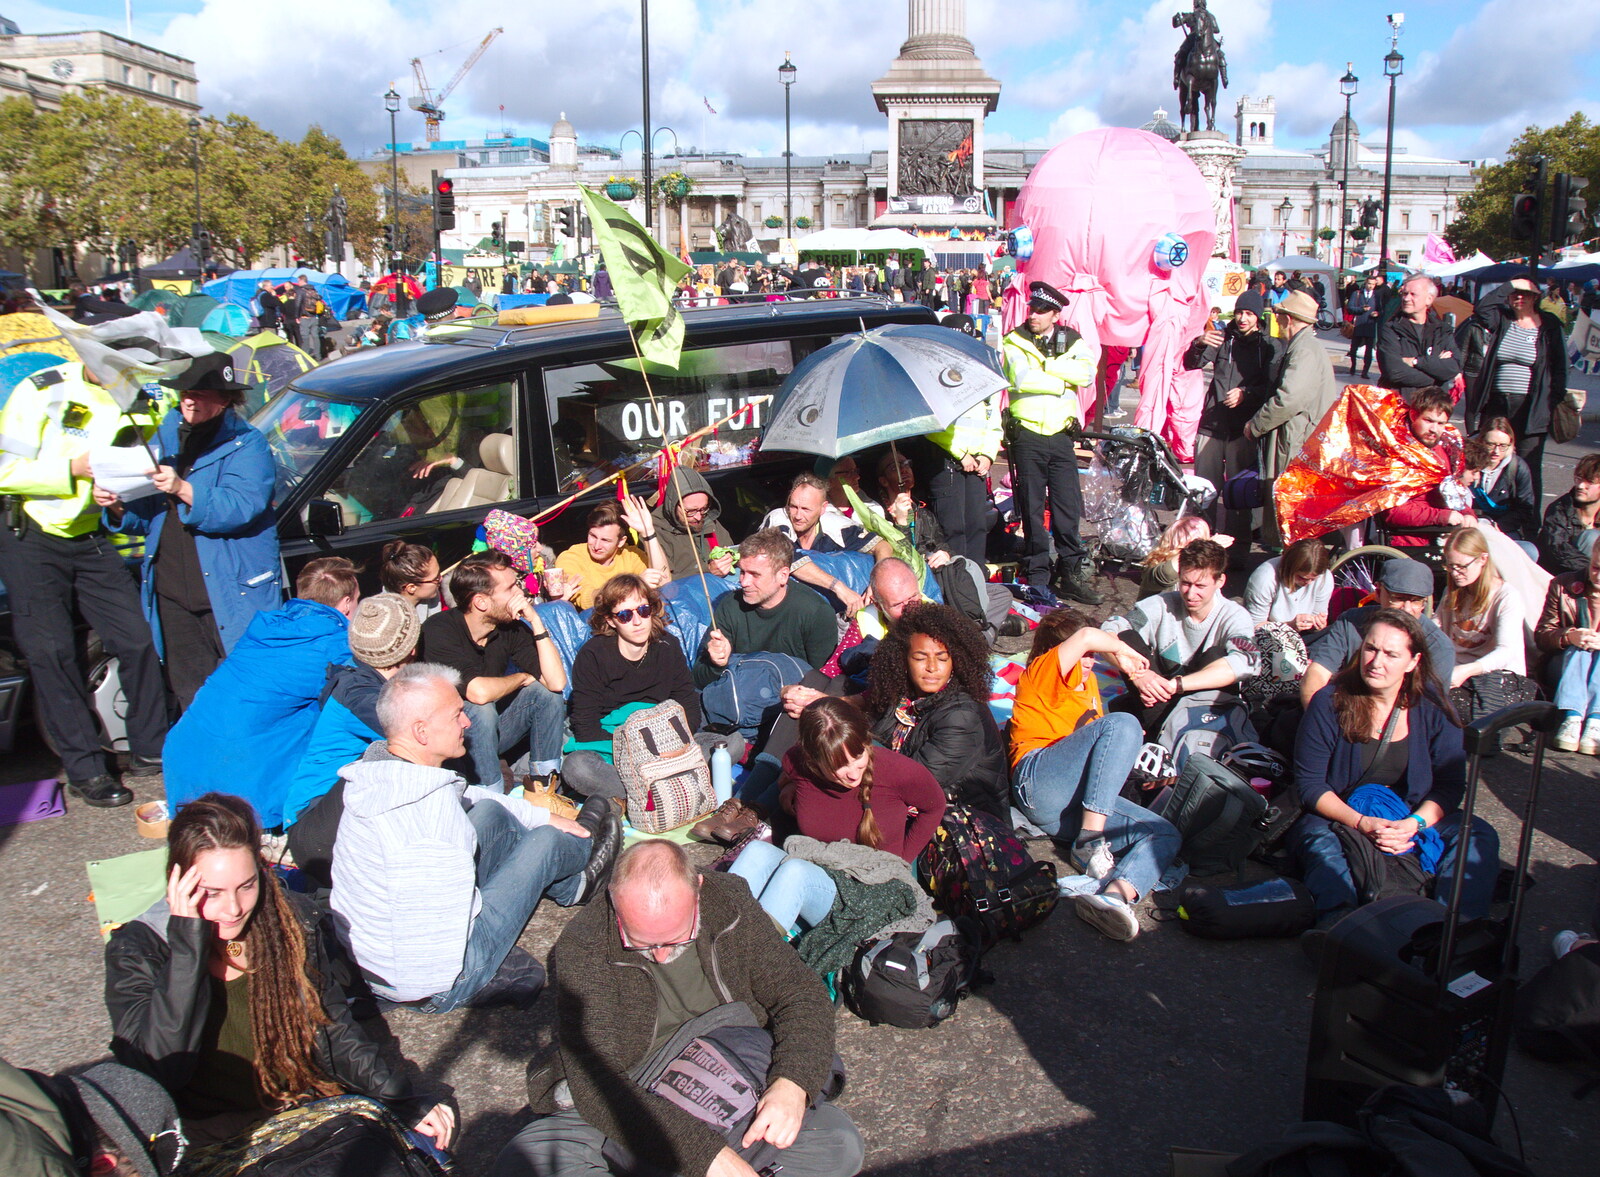 On the second day, there's a sit-in going on from The Extinction Rebellion Protest, Westminster, London - 9th October 2019